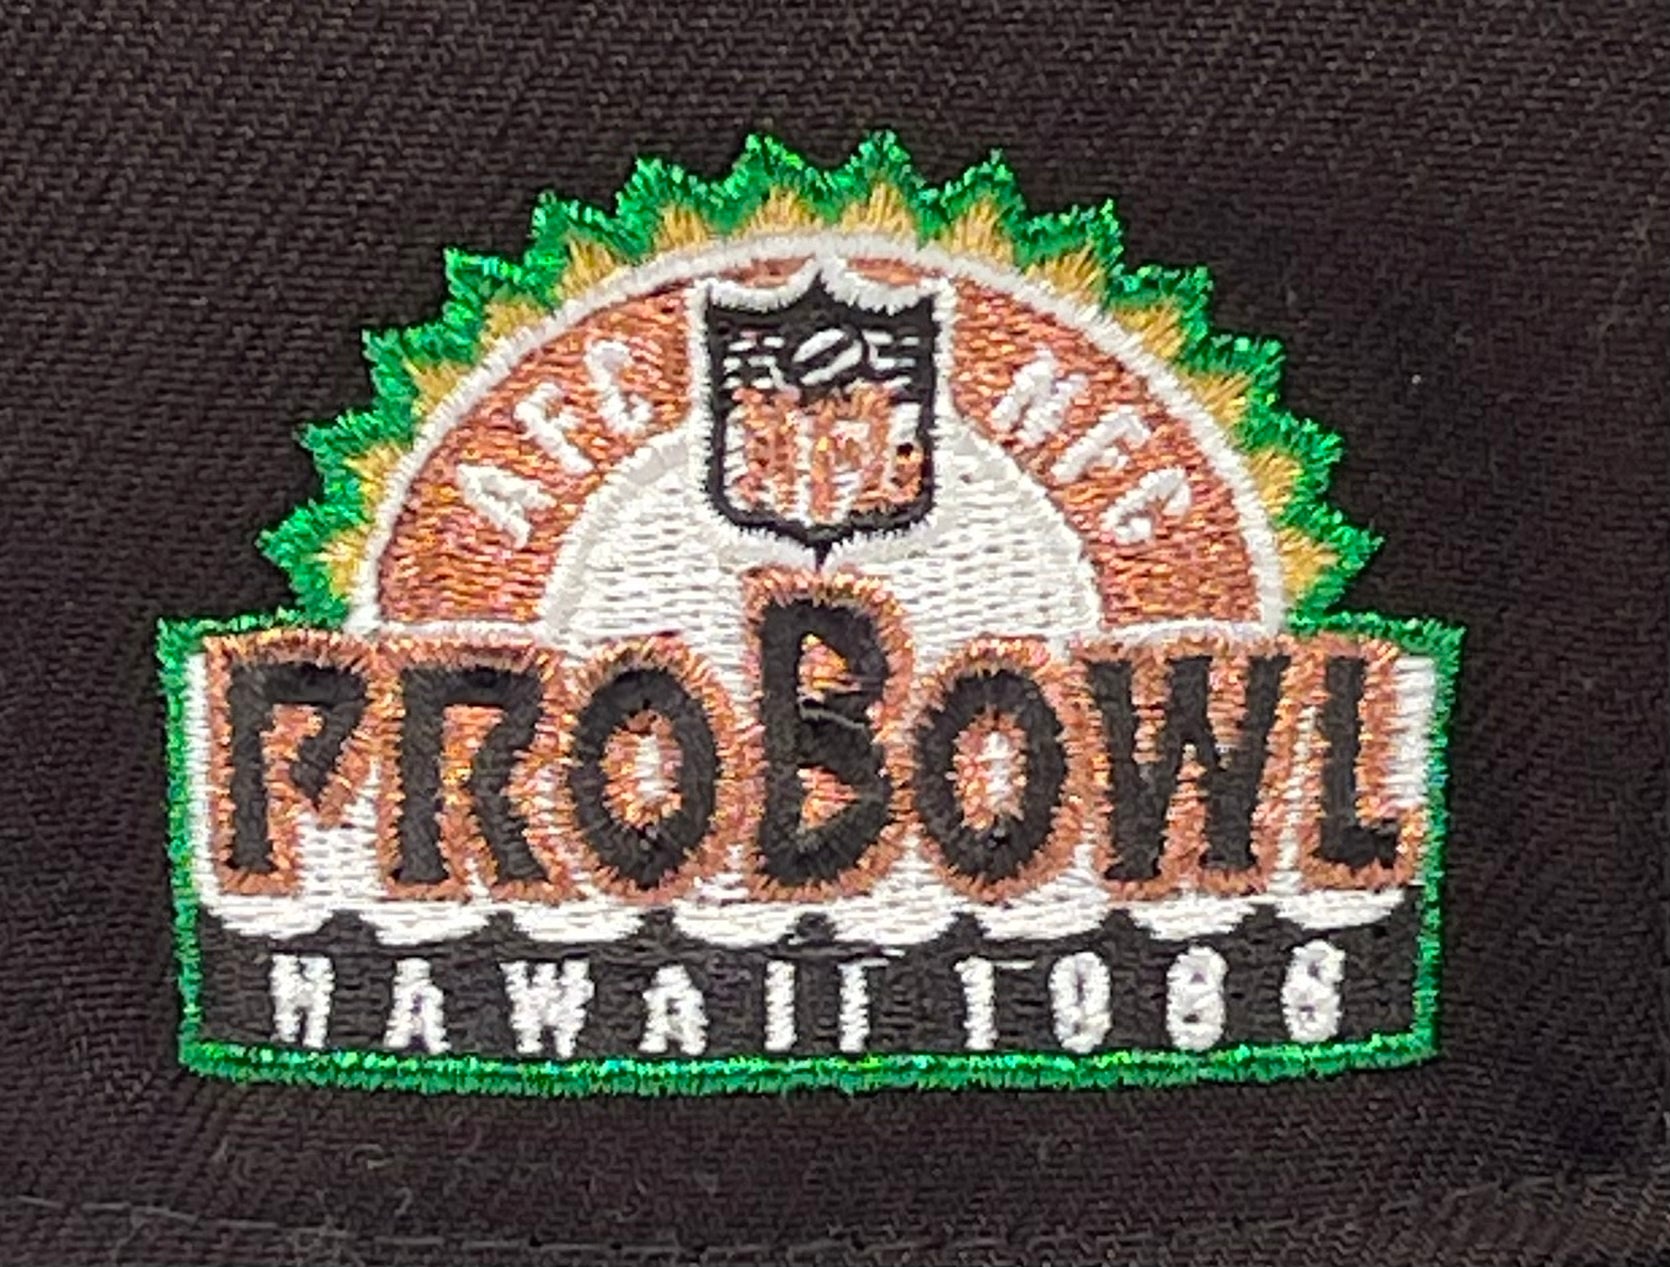 CHICAGO BEARS (BROWN) (1988 PRO BOWL) NEW ERA 59FIFTY FITTED